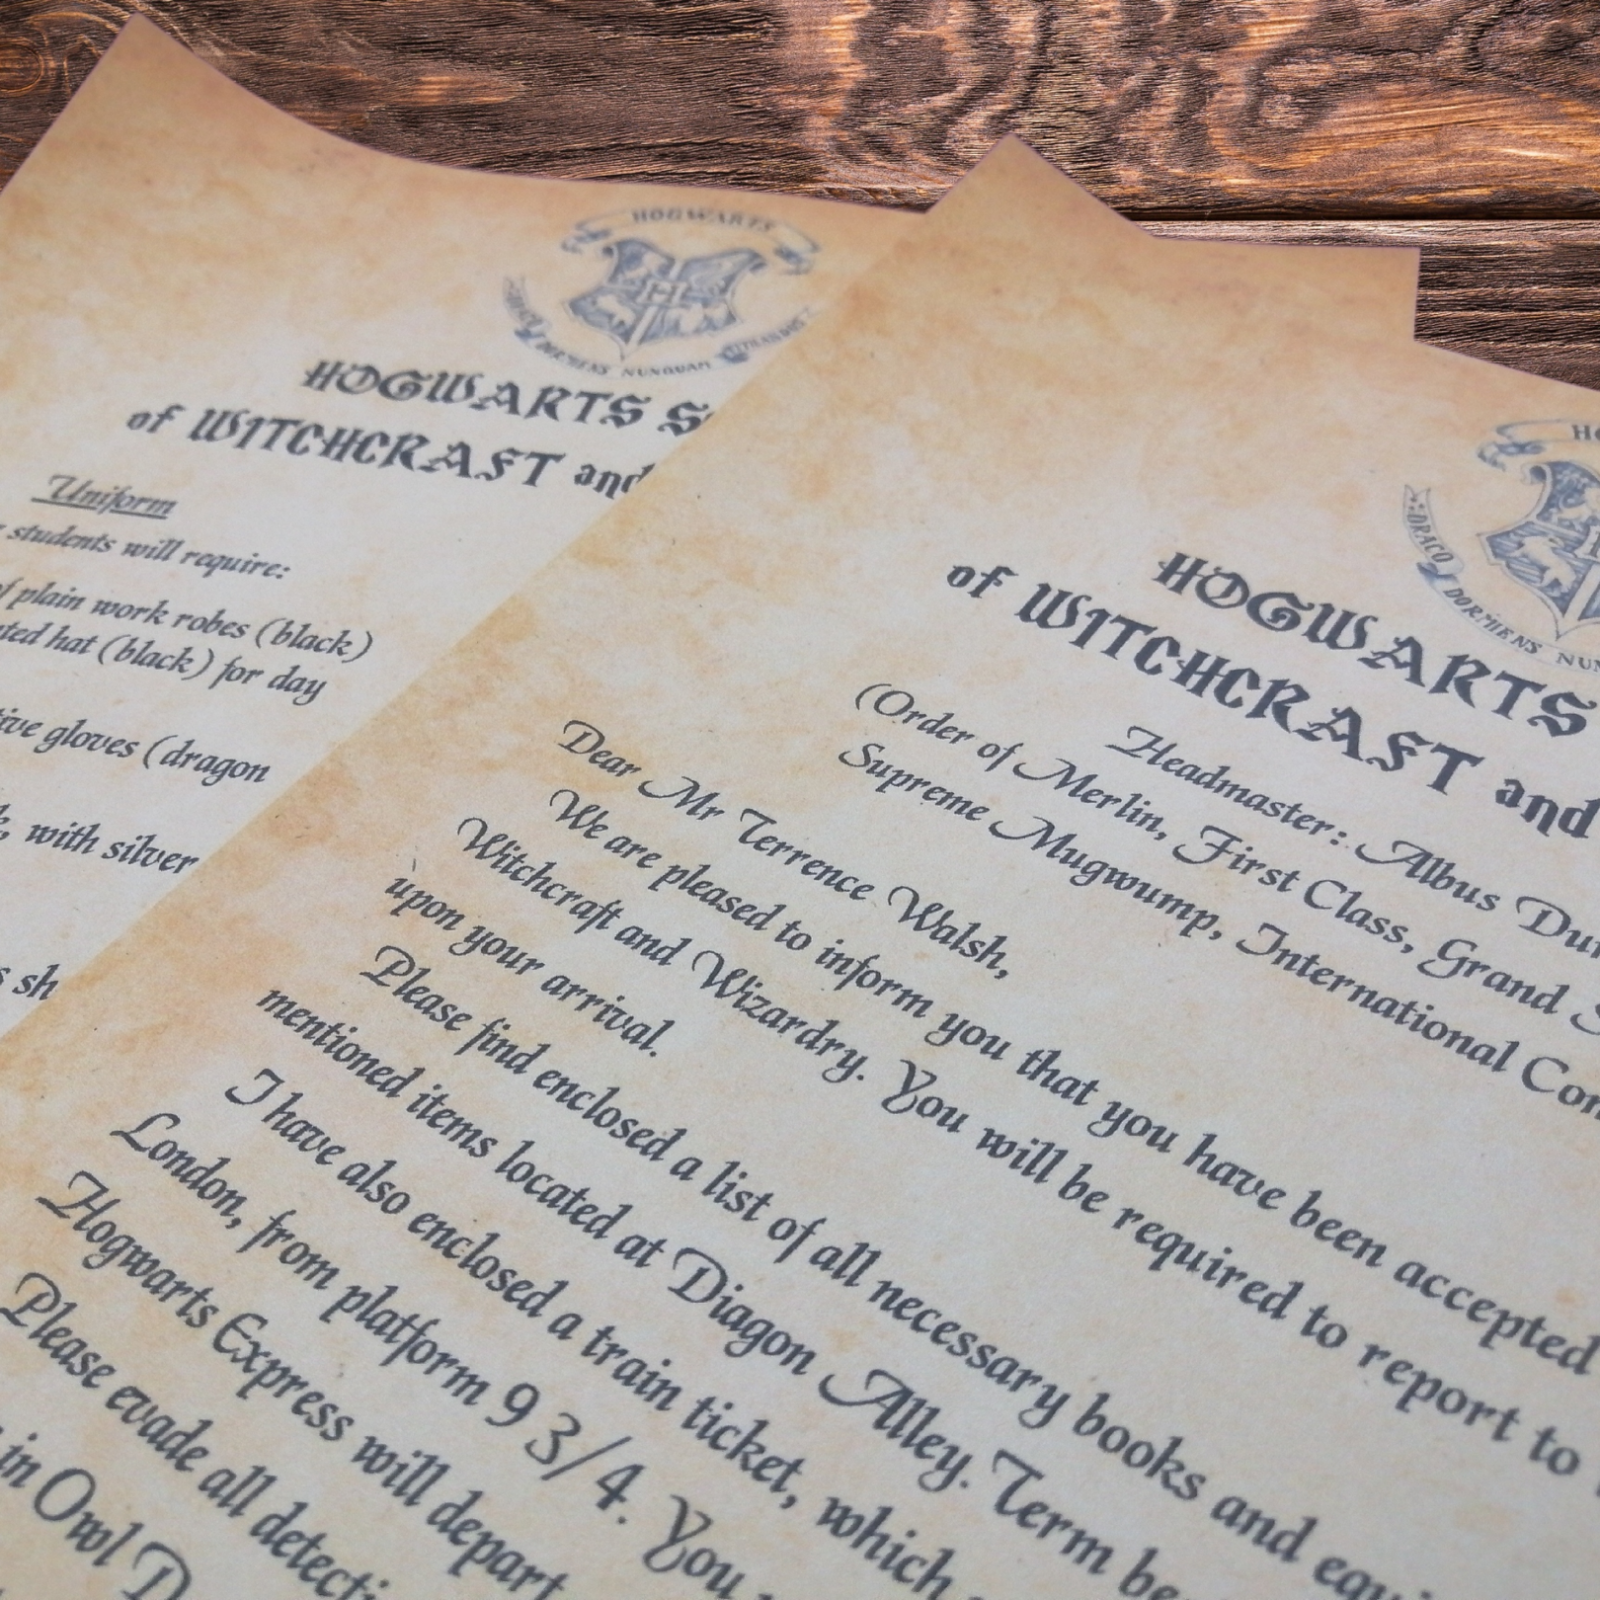 Editable Hogwarts Acceptance Letter Set to Wizard School of Witchcraft and  Wizardry, New Editable & Printable Hogwarts Letter 